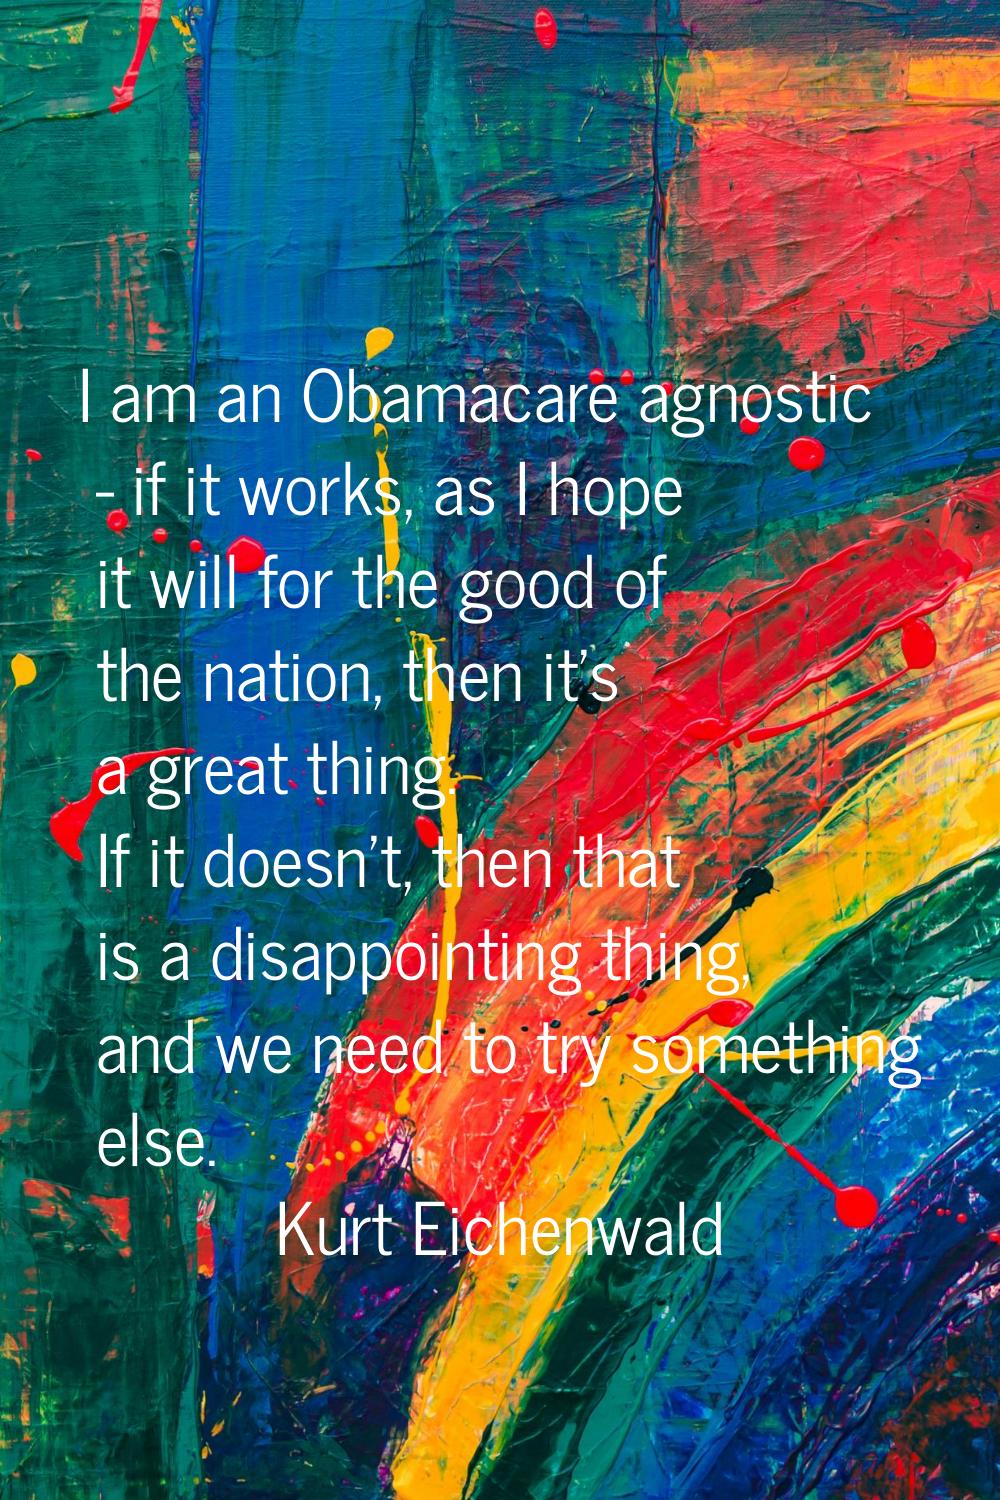 I am an Obamacare agnostic - if it works, as I hope it will for the good of the nation, then it's a